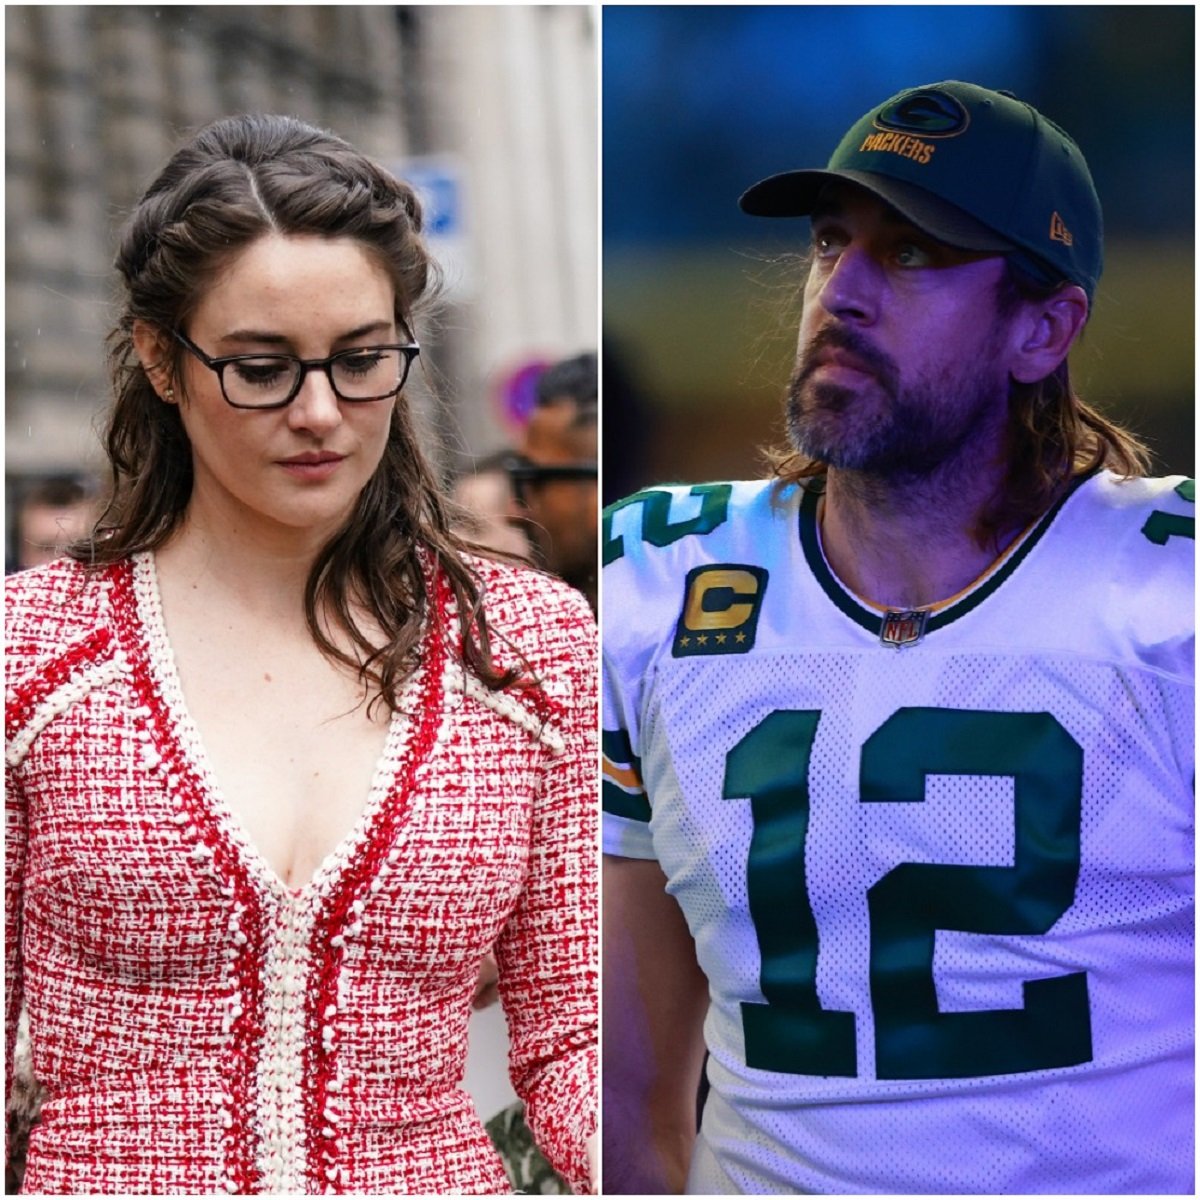 Aaron Rodgers’ New Girlfriend Appears to Be Taunting His Ex Shailene Woodley